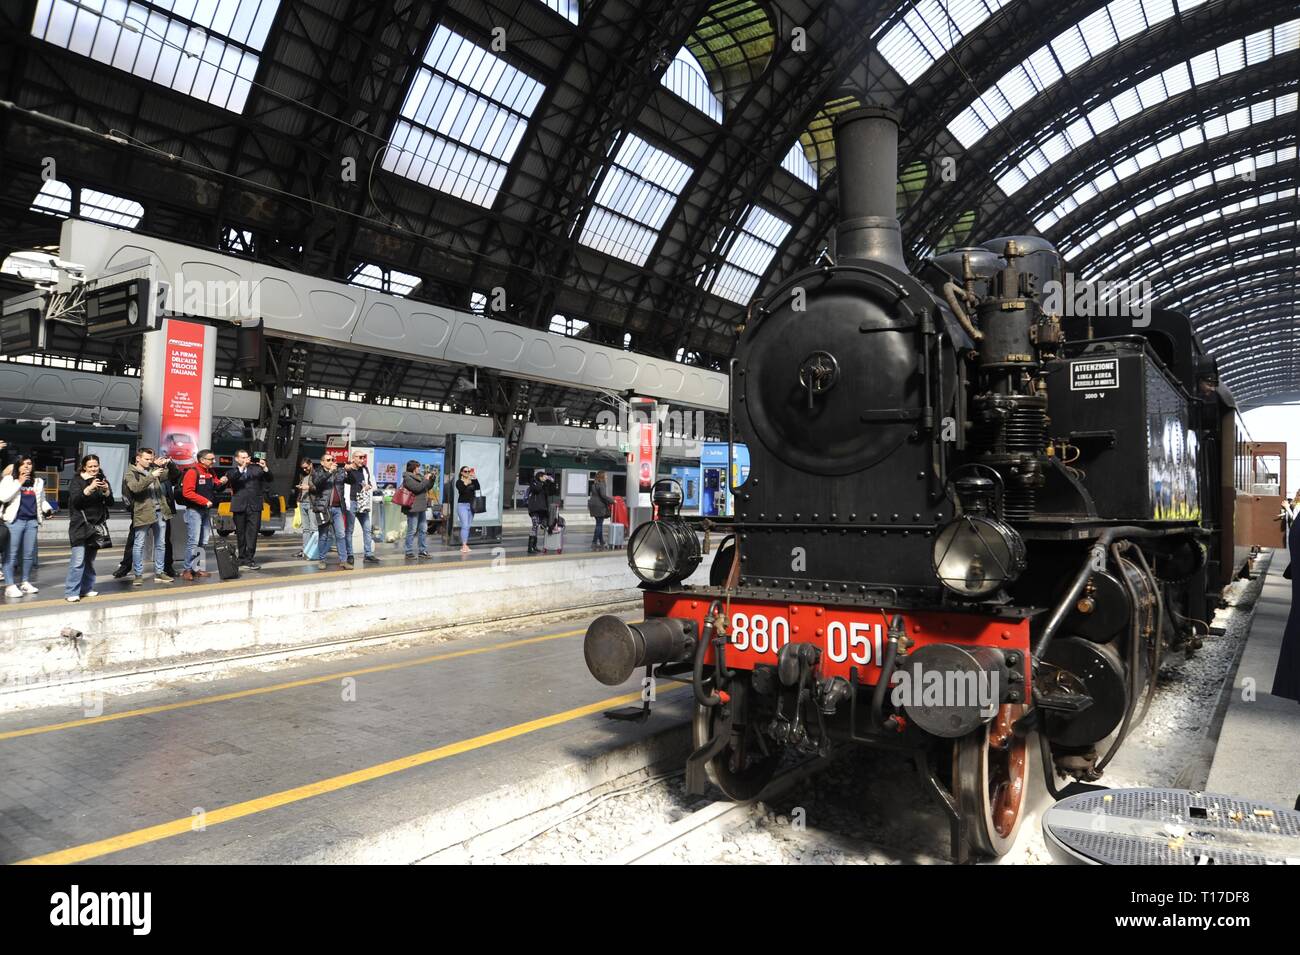 Italy, foundation FS Italiane, open day at the workshops of the 'Squadra Rialzo' of Milano Centrale station, where historical trains are preserved and restored, on the occasion of the FAI Spring Days. Steam locomotive 880 Stock Photo